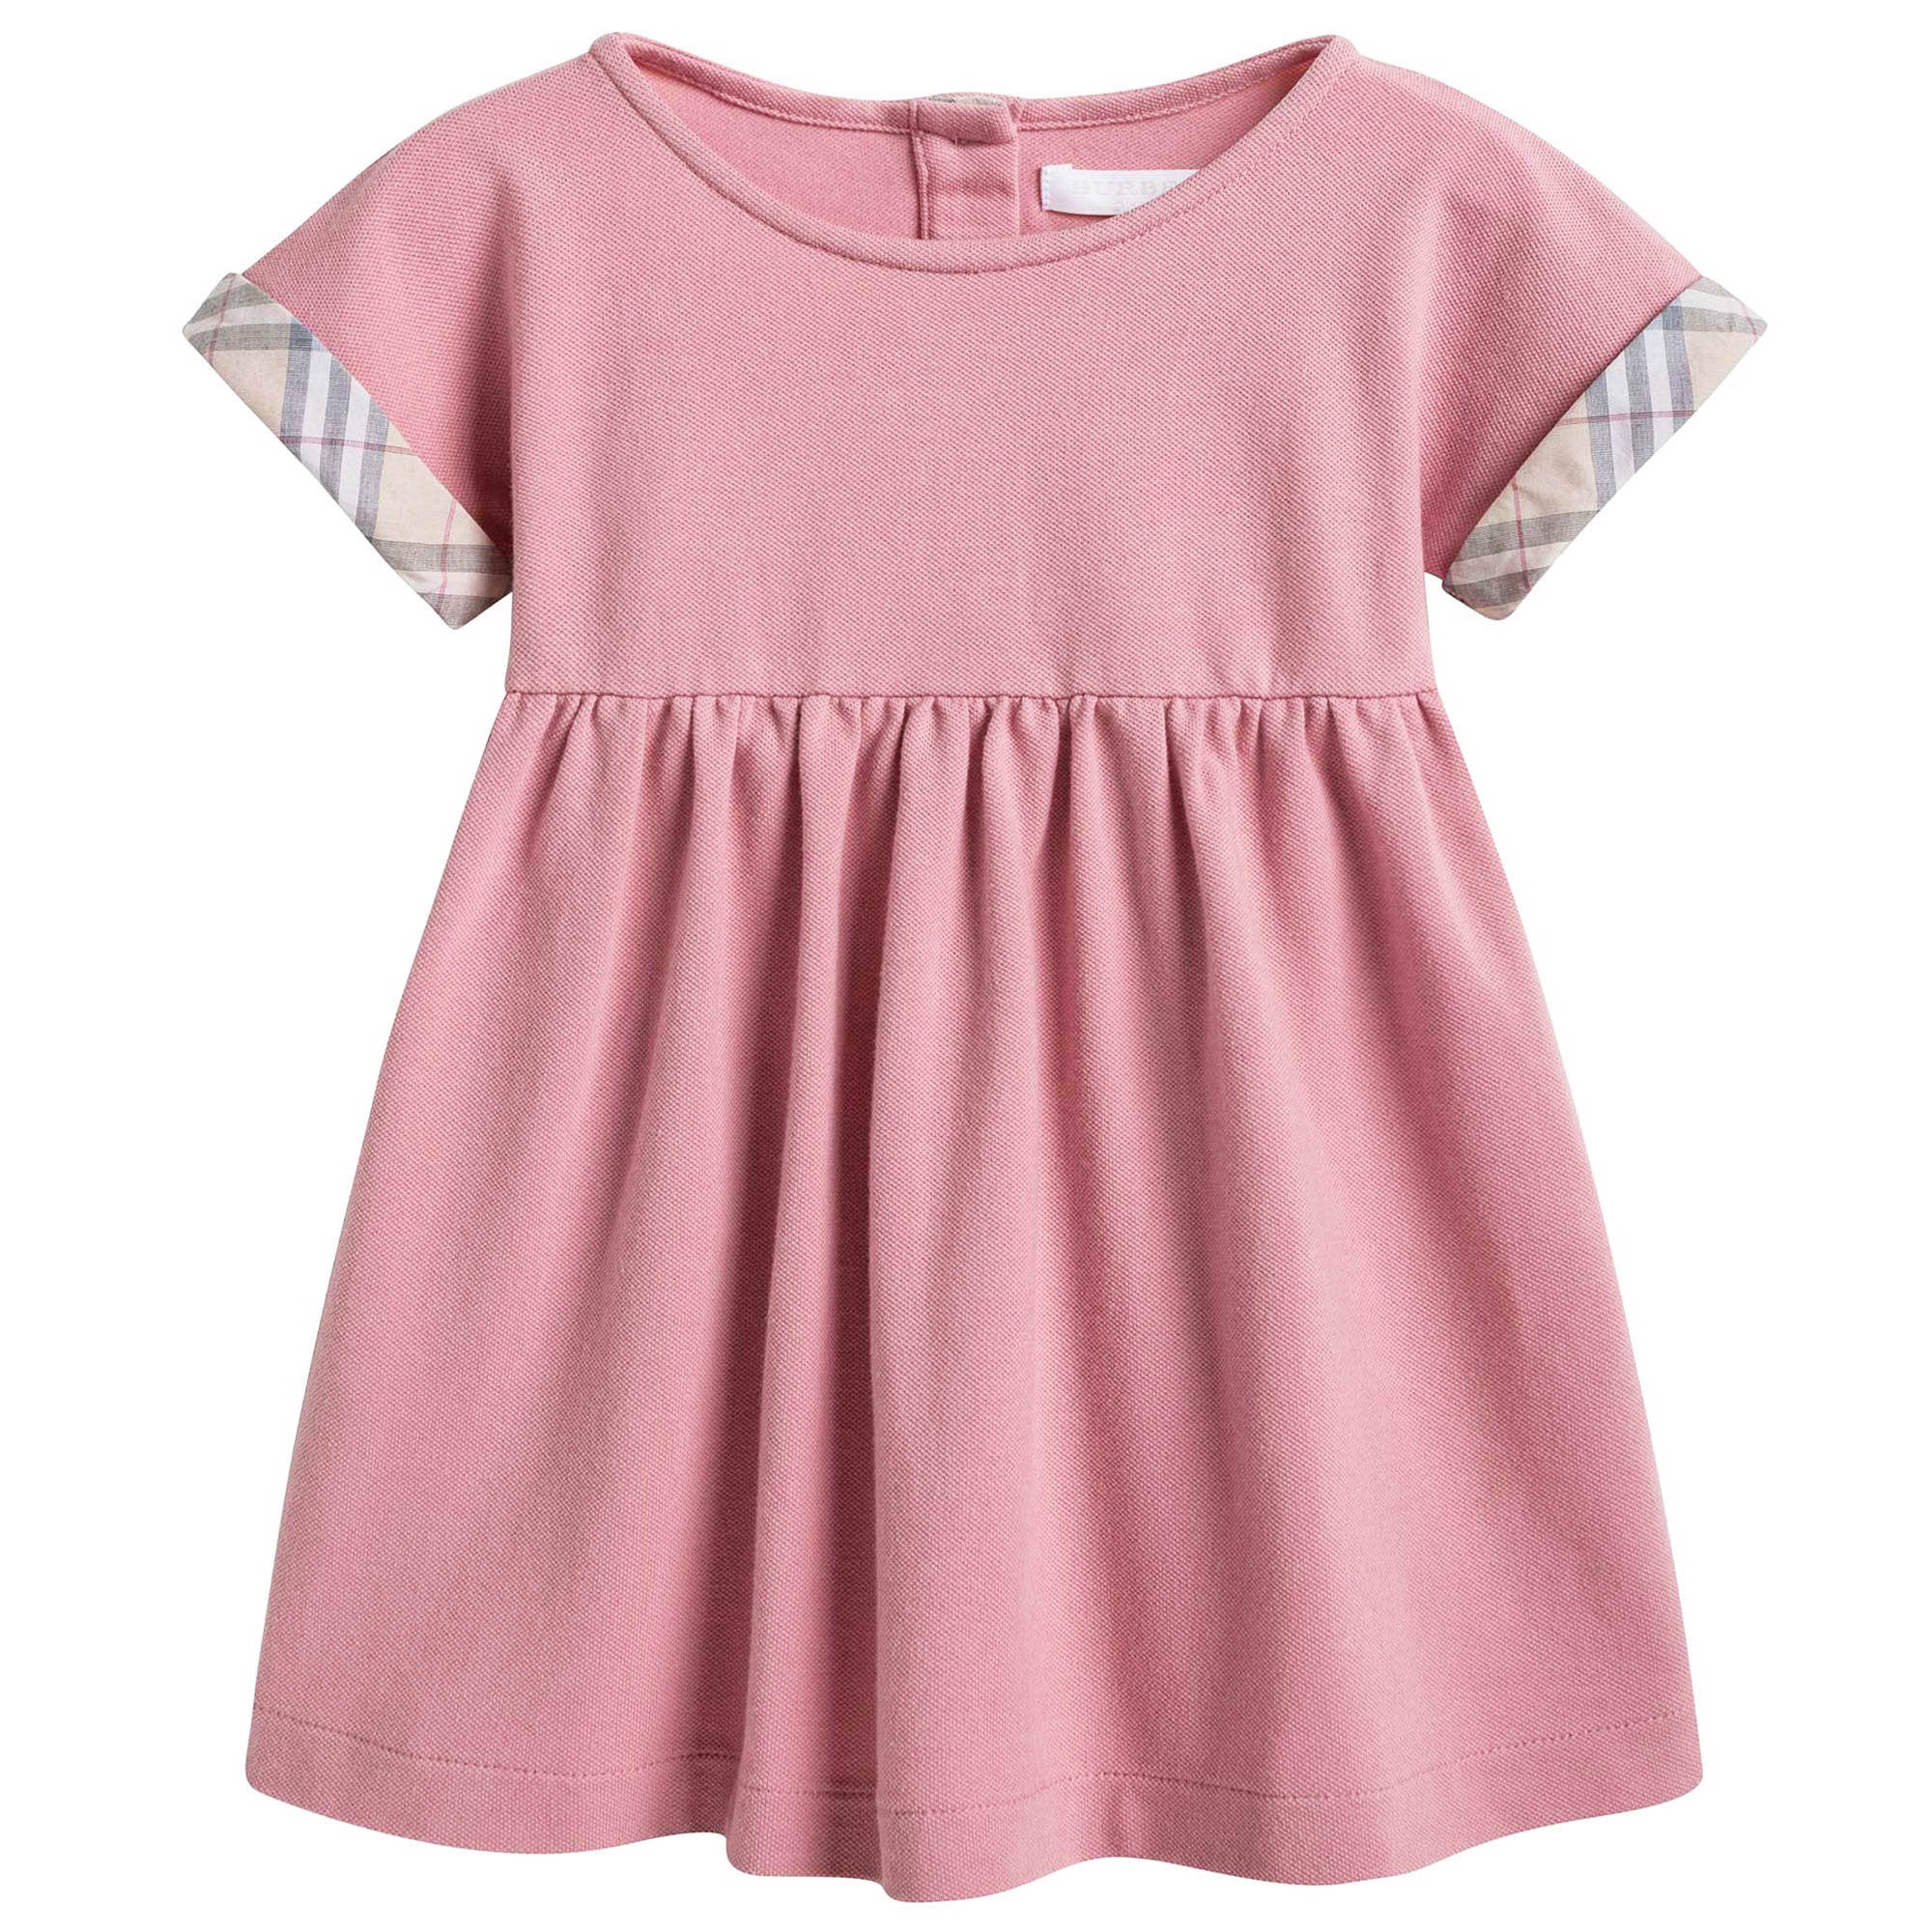 Baby Girls Pink Cotton Dress With Check Trim